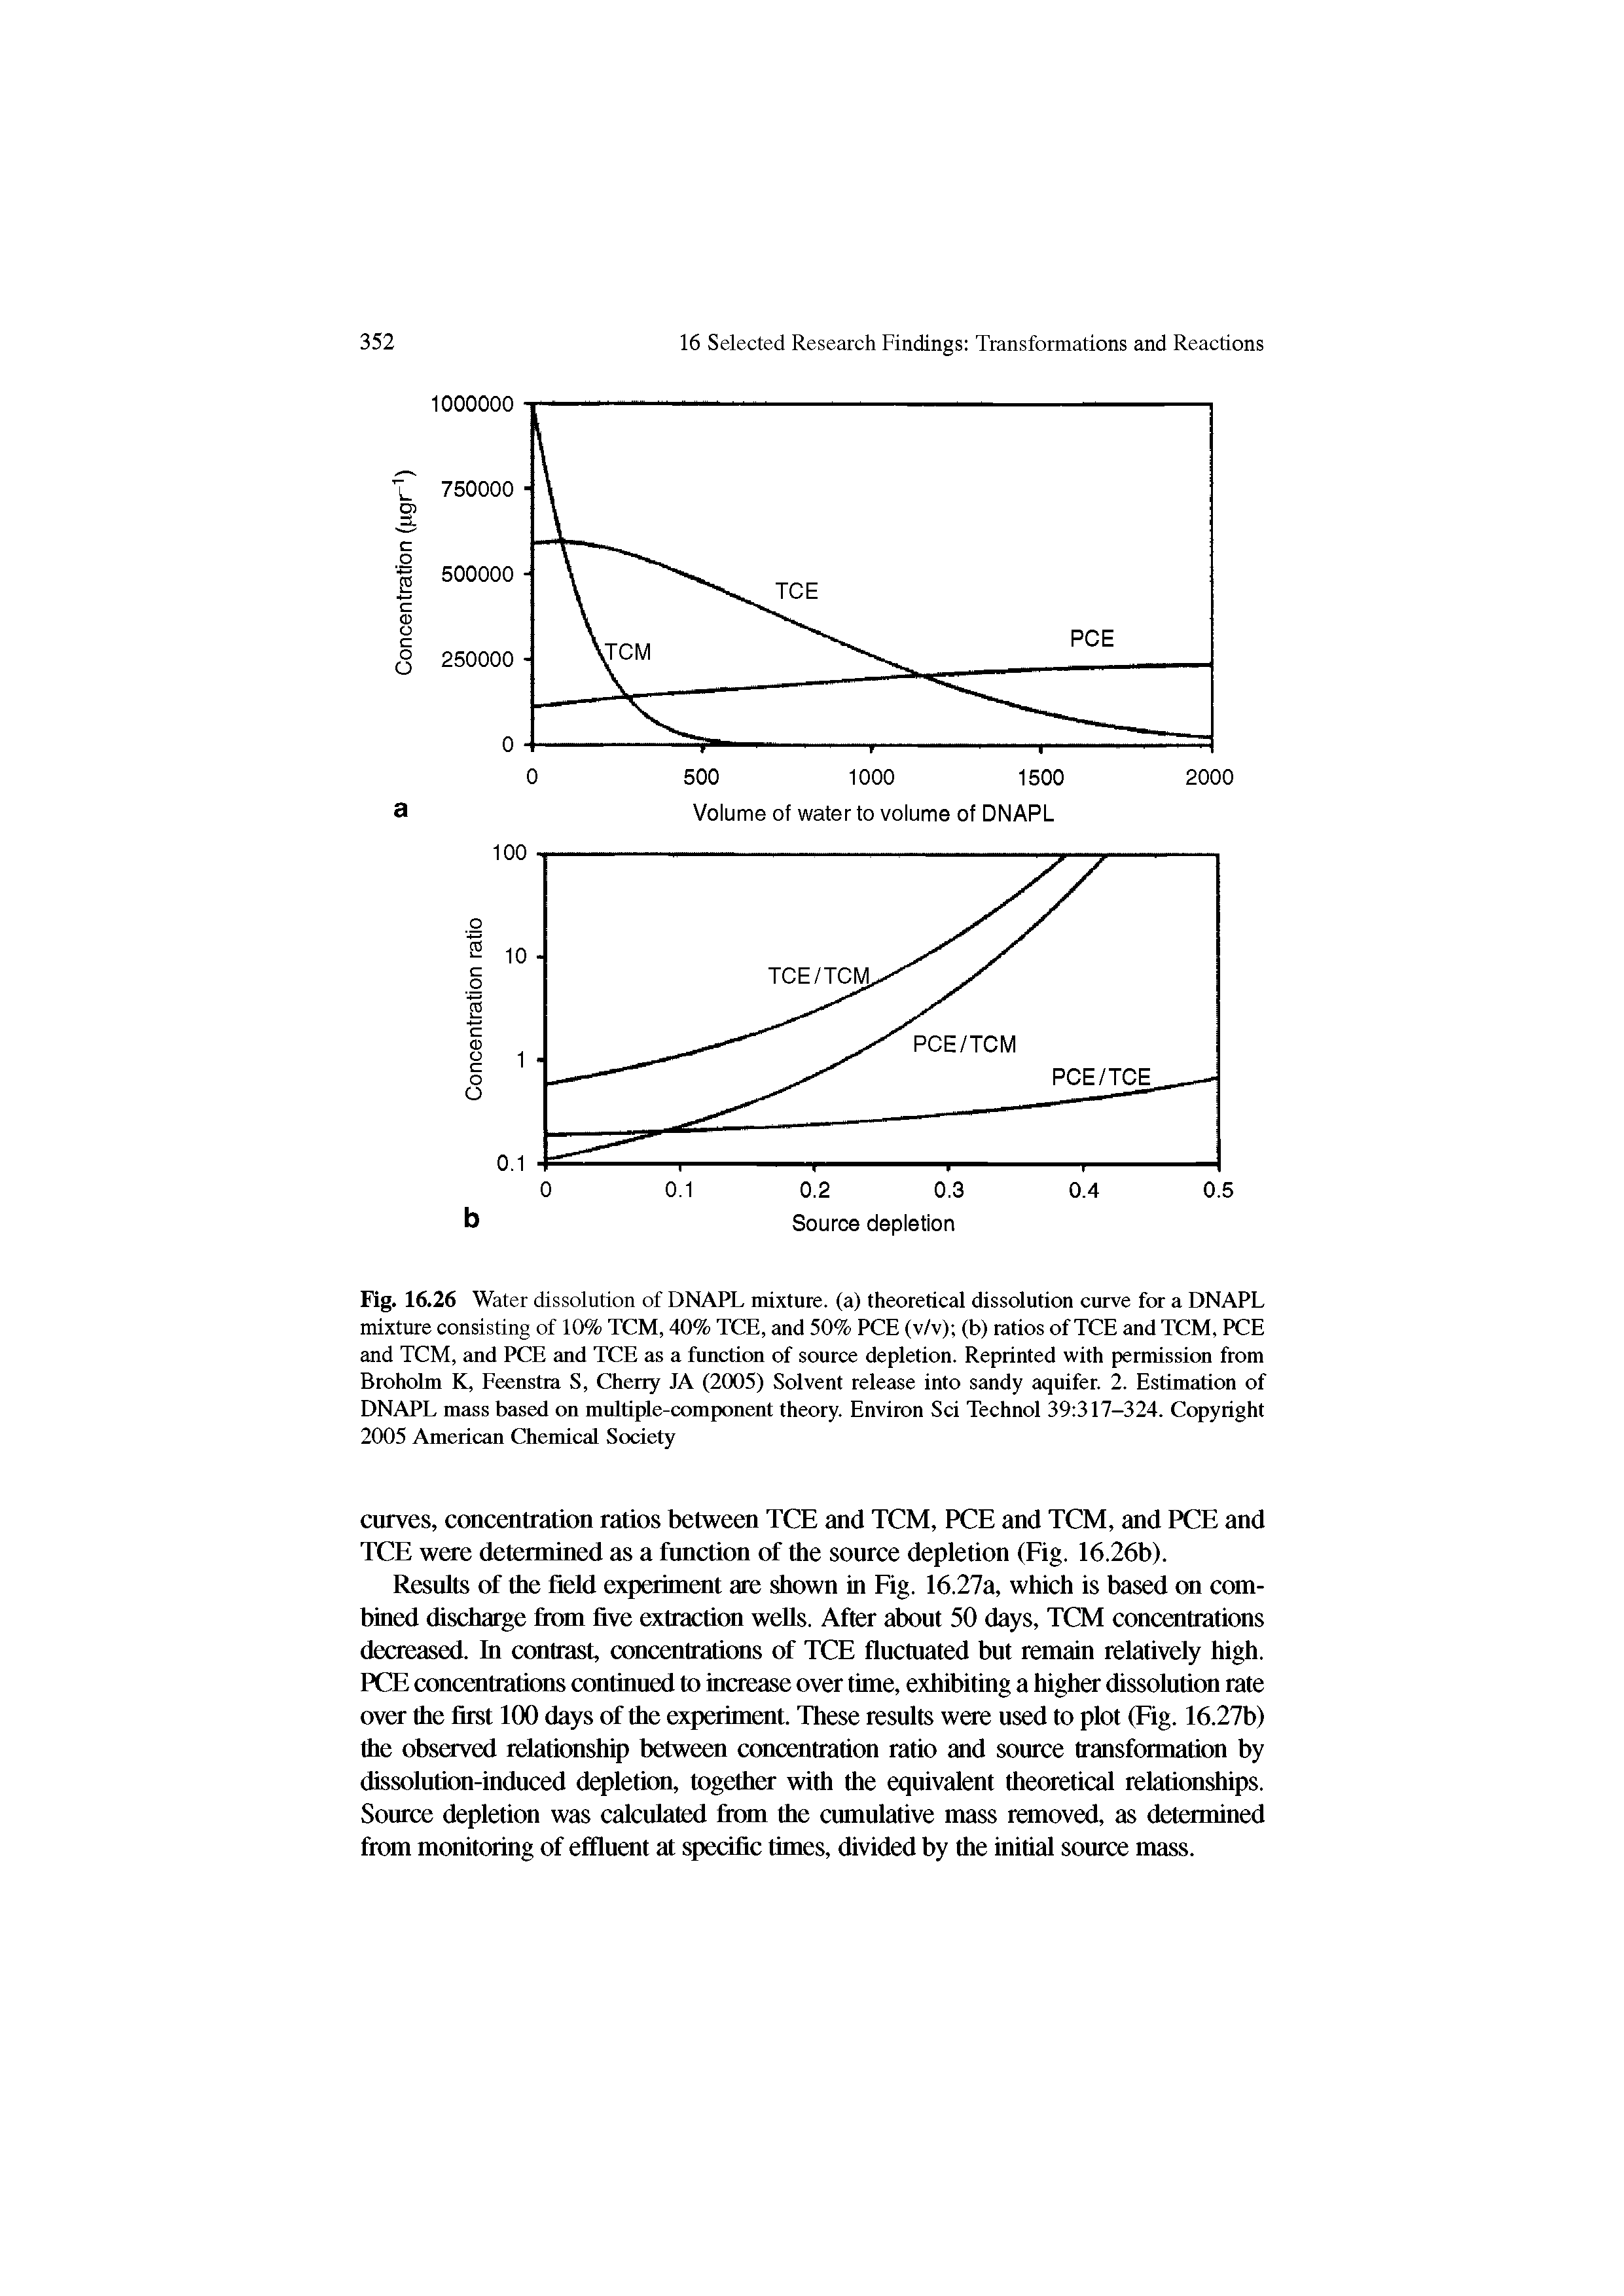 Fig. 16.26 Water dissolution of DNAPL mixture, (a) theoretical dissolution curve for a DNAPL mixture consisting of 10% TCM, 40% TCE, and 50% PCE (v/v) (b) ratios of TCE and TCM, PCE and TCM, and PCE and TCE as a function of source depletion. Reprinted with permission from Broholm K, Eeenstra S, Cherry JA (2005) Solvent release into sandy aquifer. 2. Estimation of DNAPL mass based on multiple-component theory. Environ Sci Technol 39 317-324. Copyright 2005 American Chemical Society...